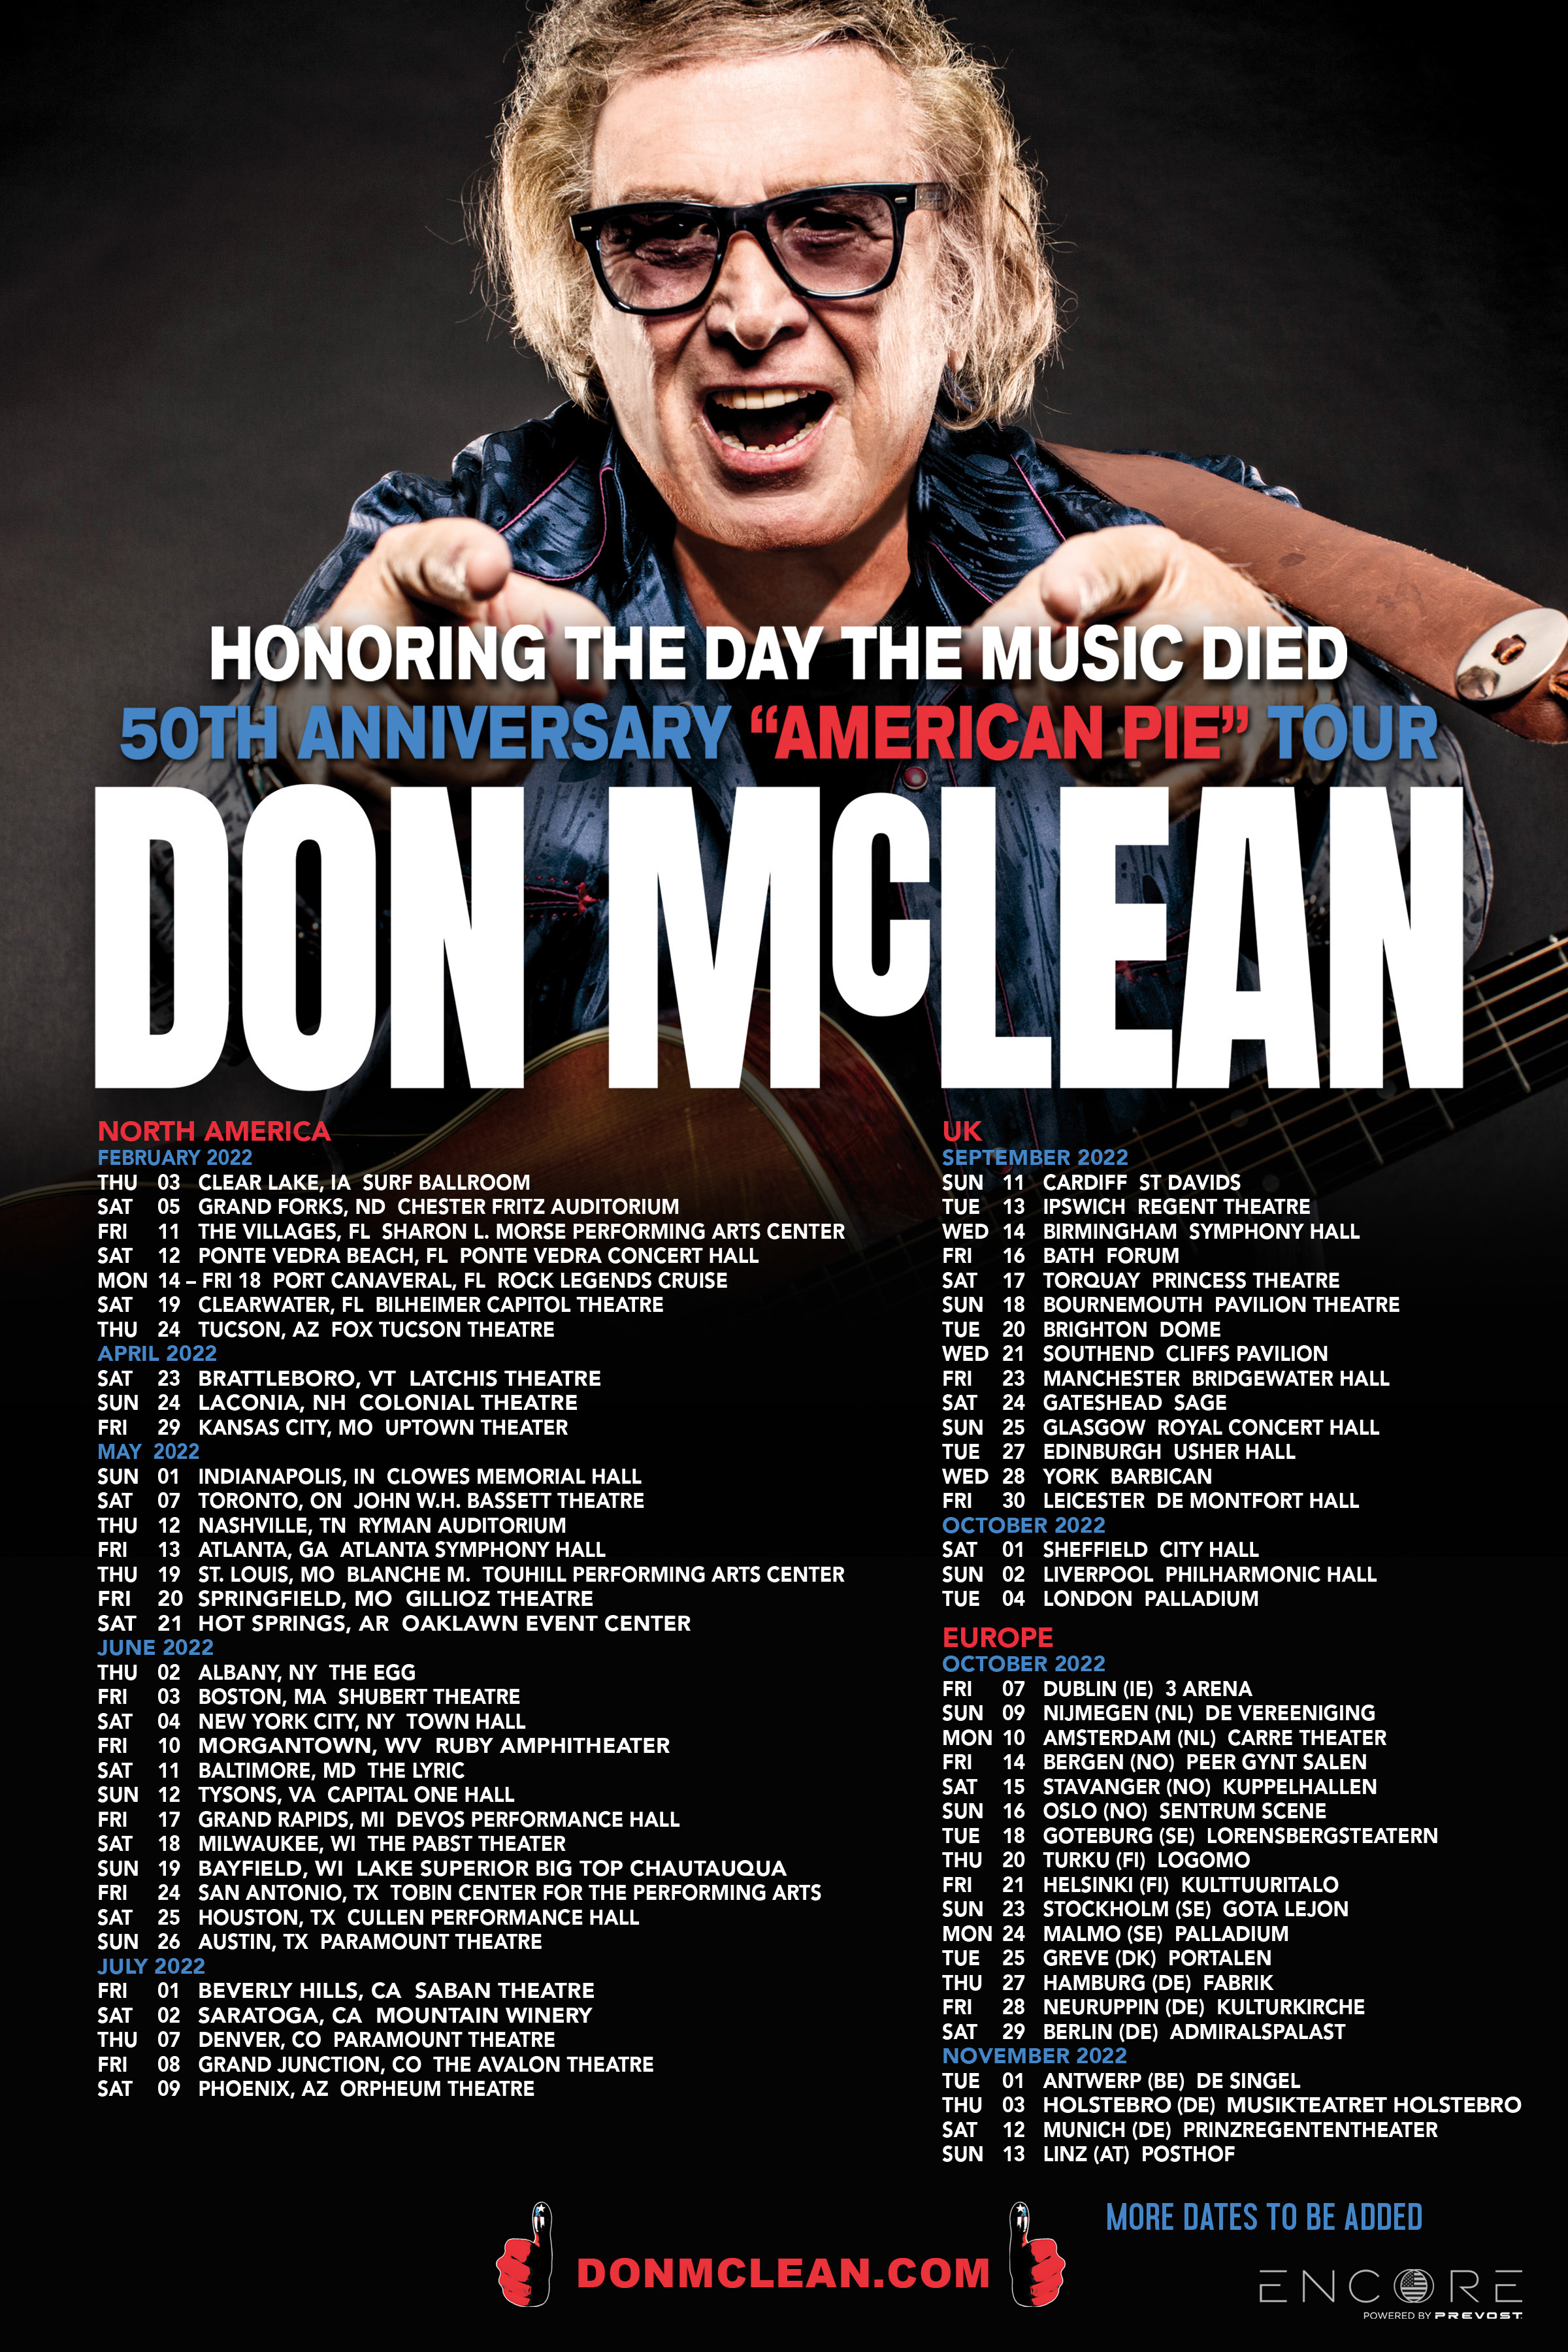 DON MCLEAN HONORS "THE DAY THE MUSIC DIED" WITH SOLD-OUT CONCERT AT SURF BALLROOM; ADDS SIX NEW DATES TO NORTH AMERICAN TOUR